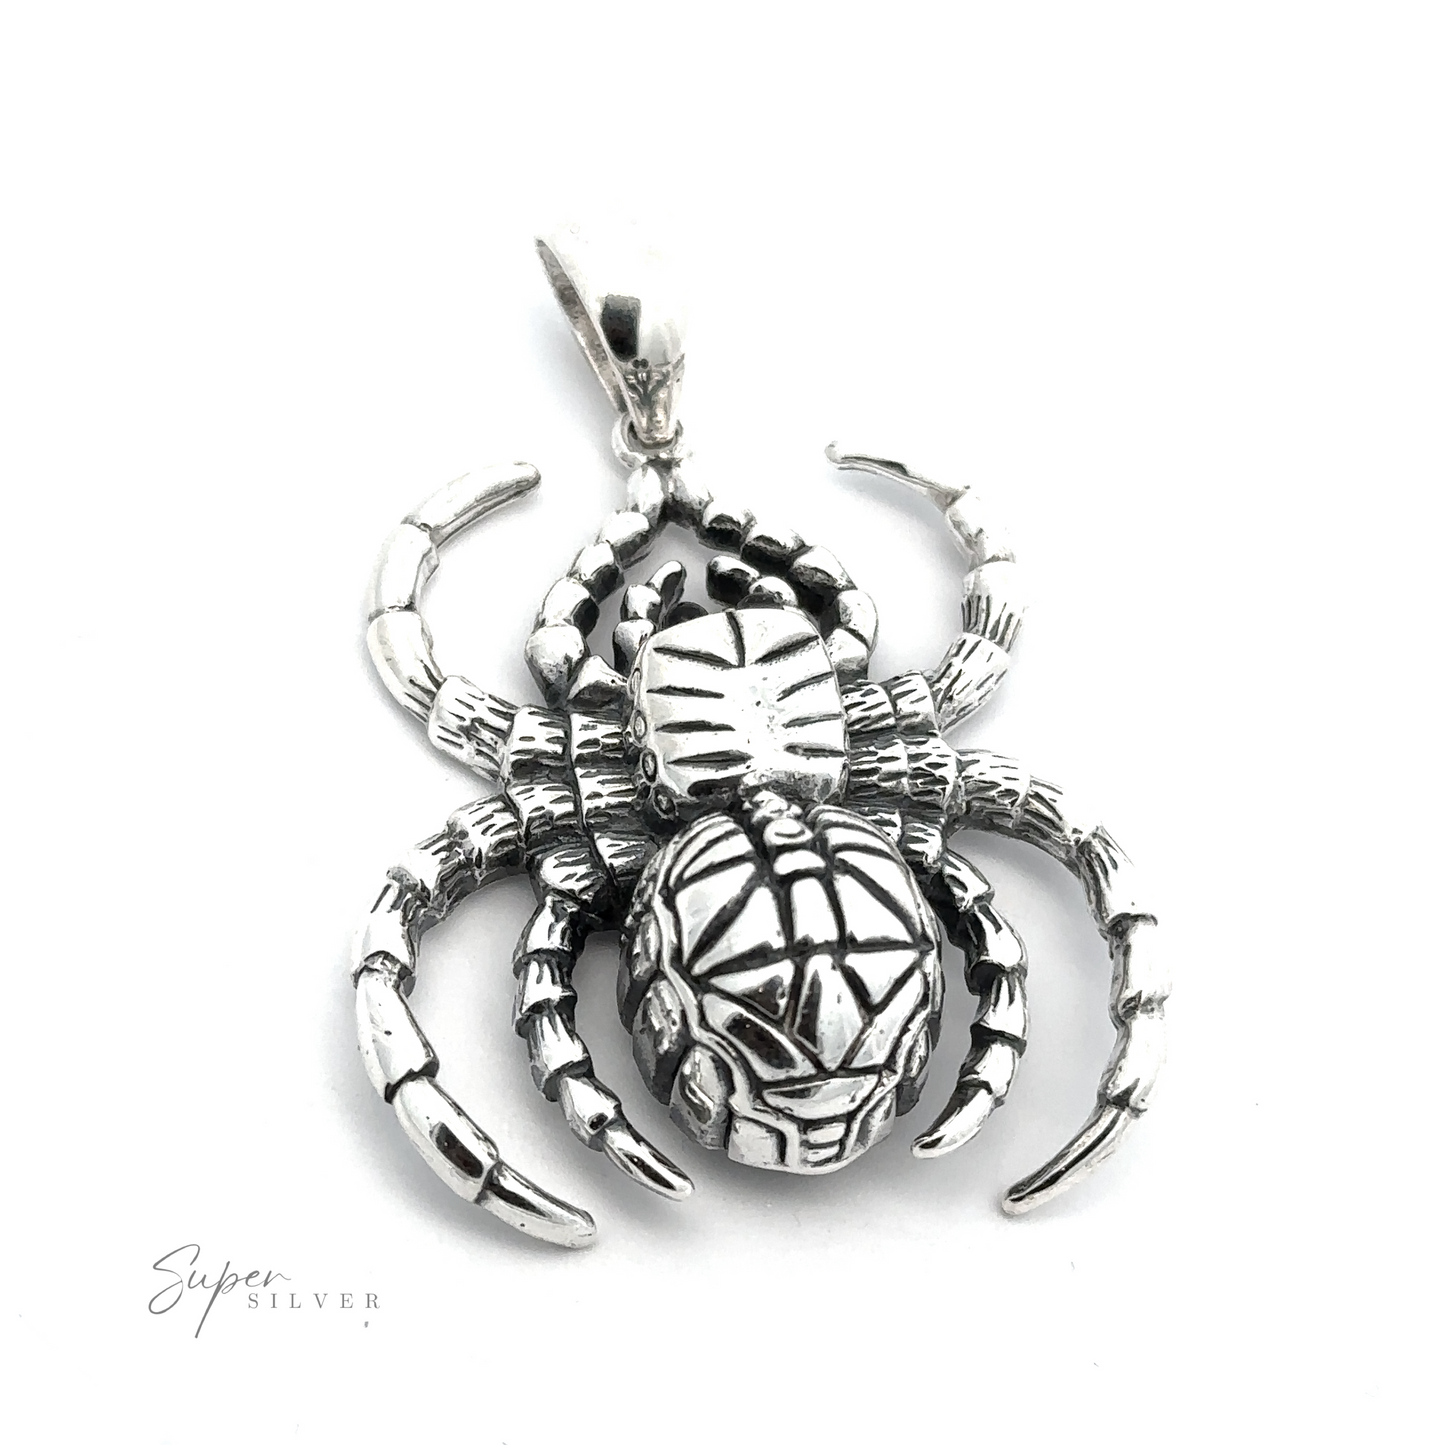 
                  
                    A detailed Large Spider Pendant featuring eight legs and a patterned body, meticulously crafted from .925 Sterling Silver, with the text "Super Silver" inscribed at the bottom left. This exquisite piece exemplifies the artistry of handcrafted jewelry.
                  
                